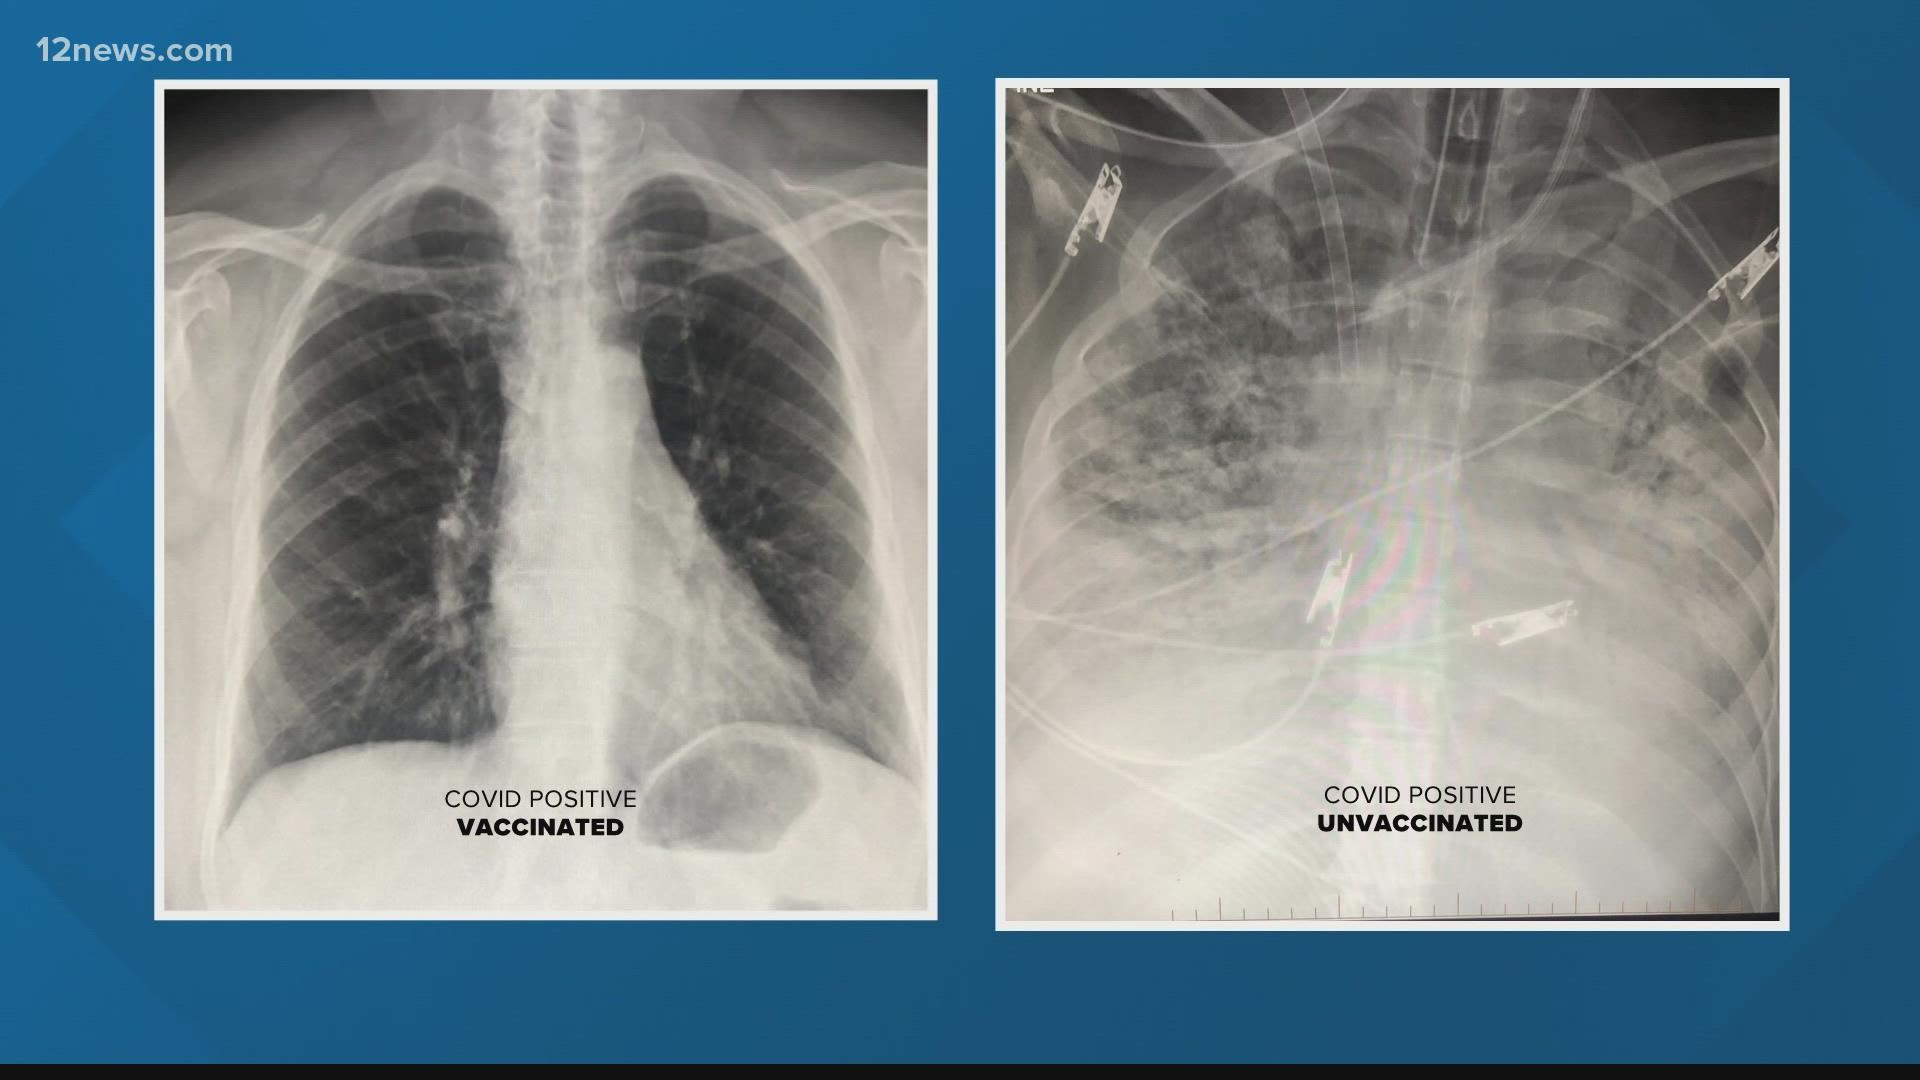 The dangers of COVID-19 are not just for new cases, some people are dealing with long-lasting effects on their lungs.